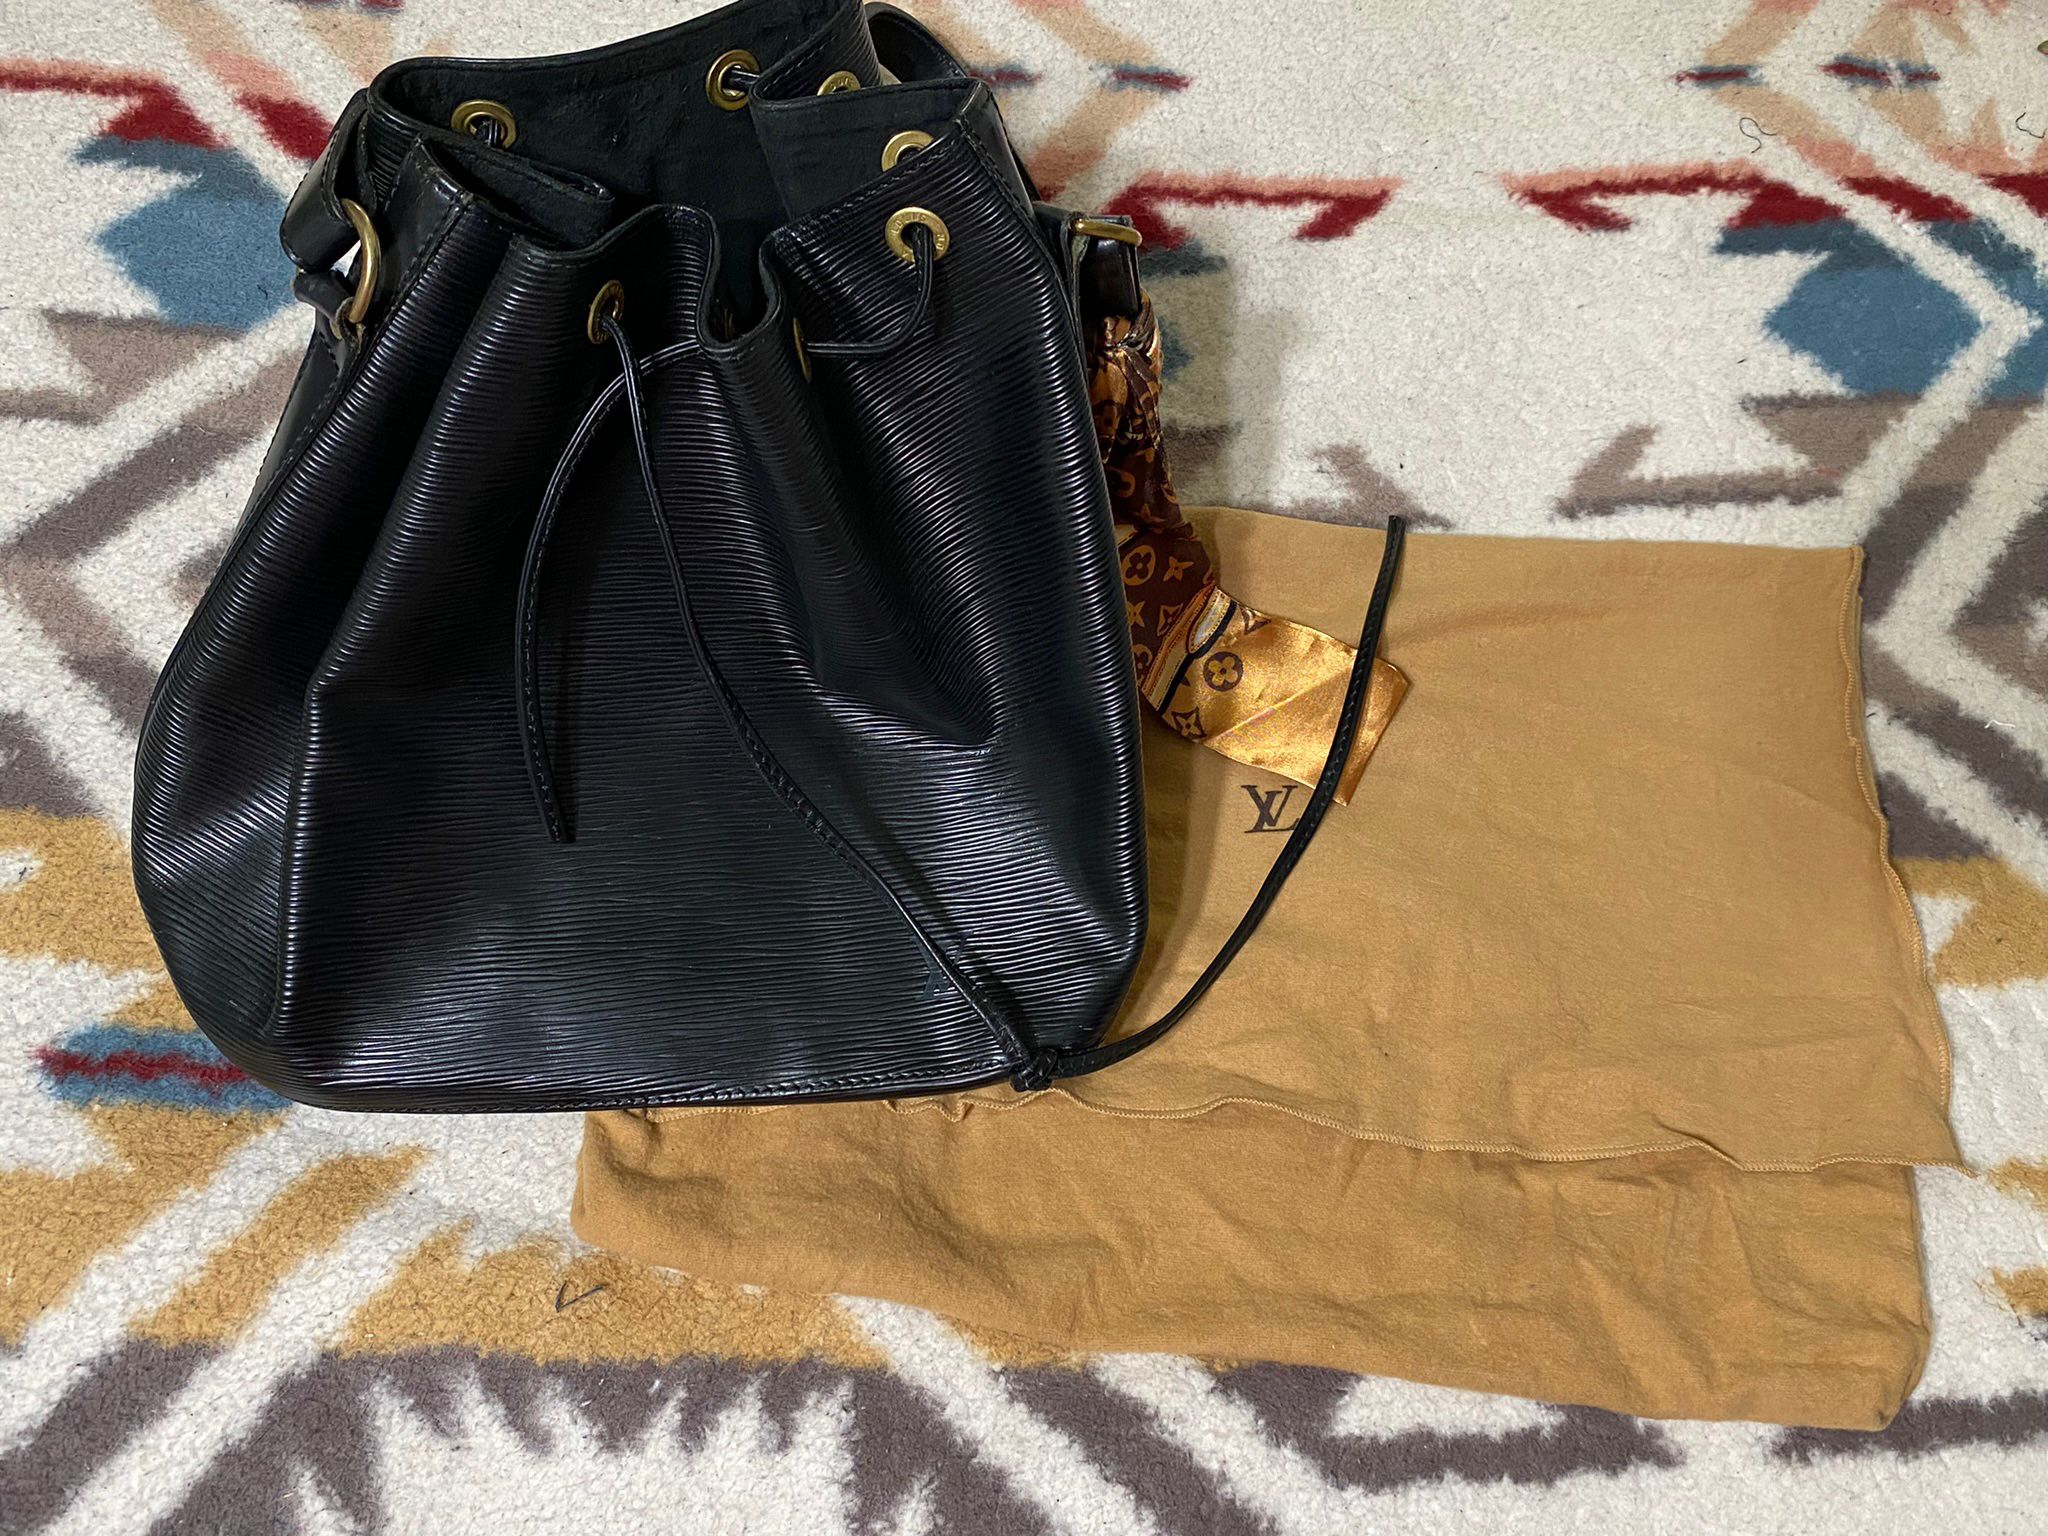 Vintage Louis Vuitton bag, Reasonable offers accepted